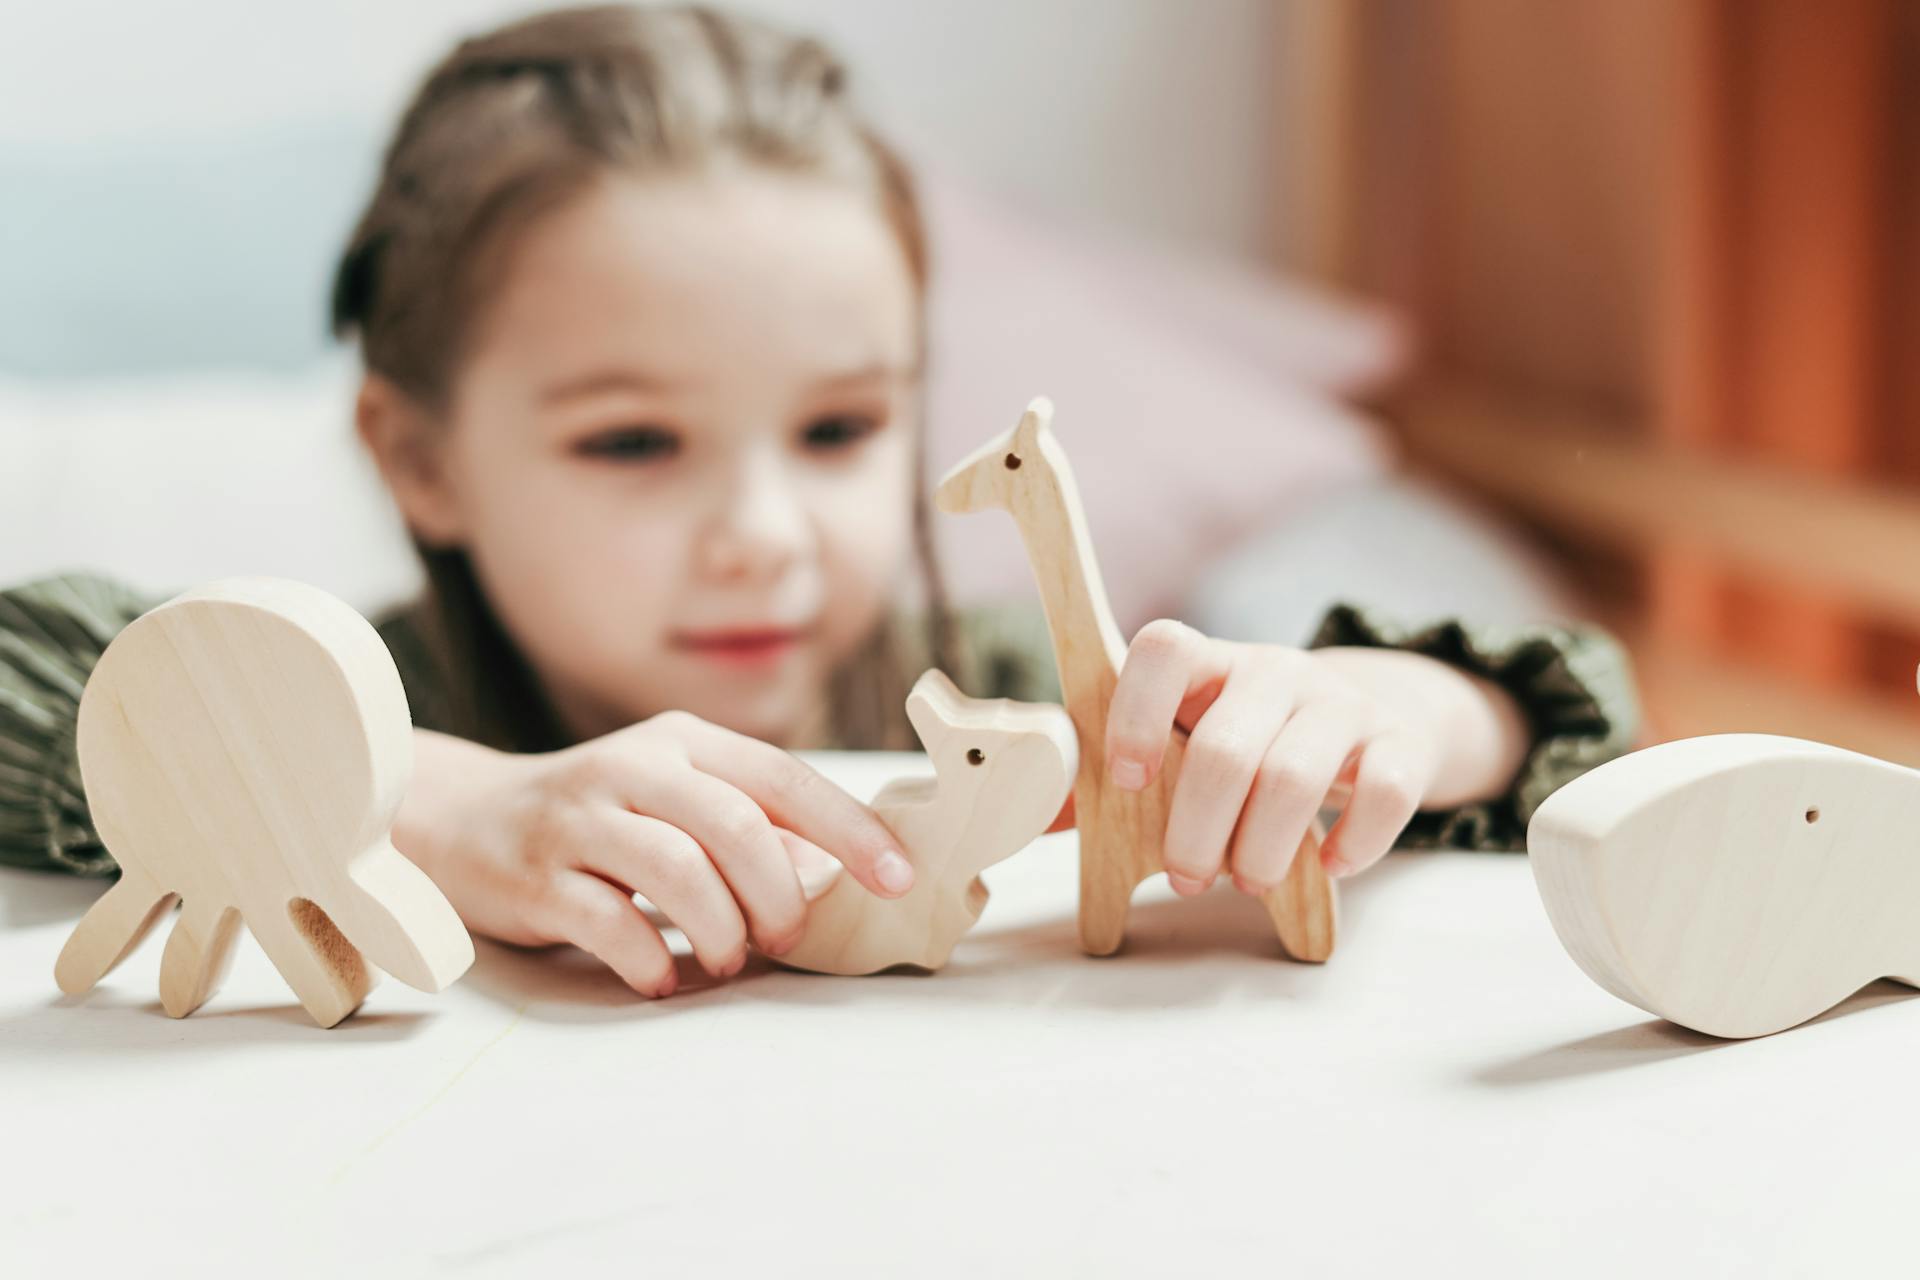 young child plays with white block figures on a white table